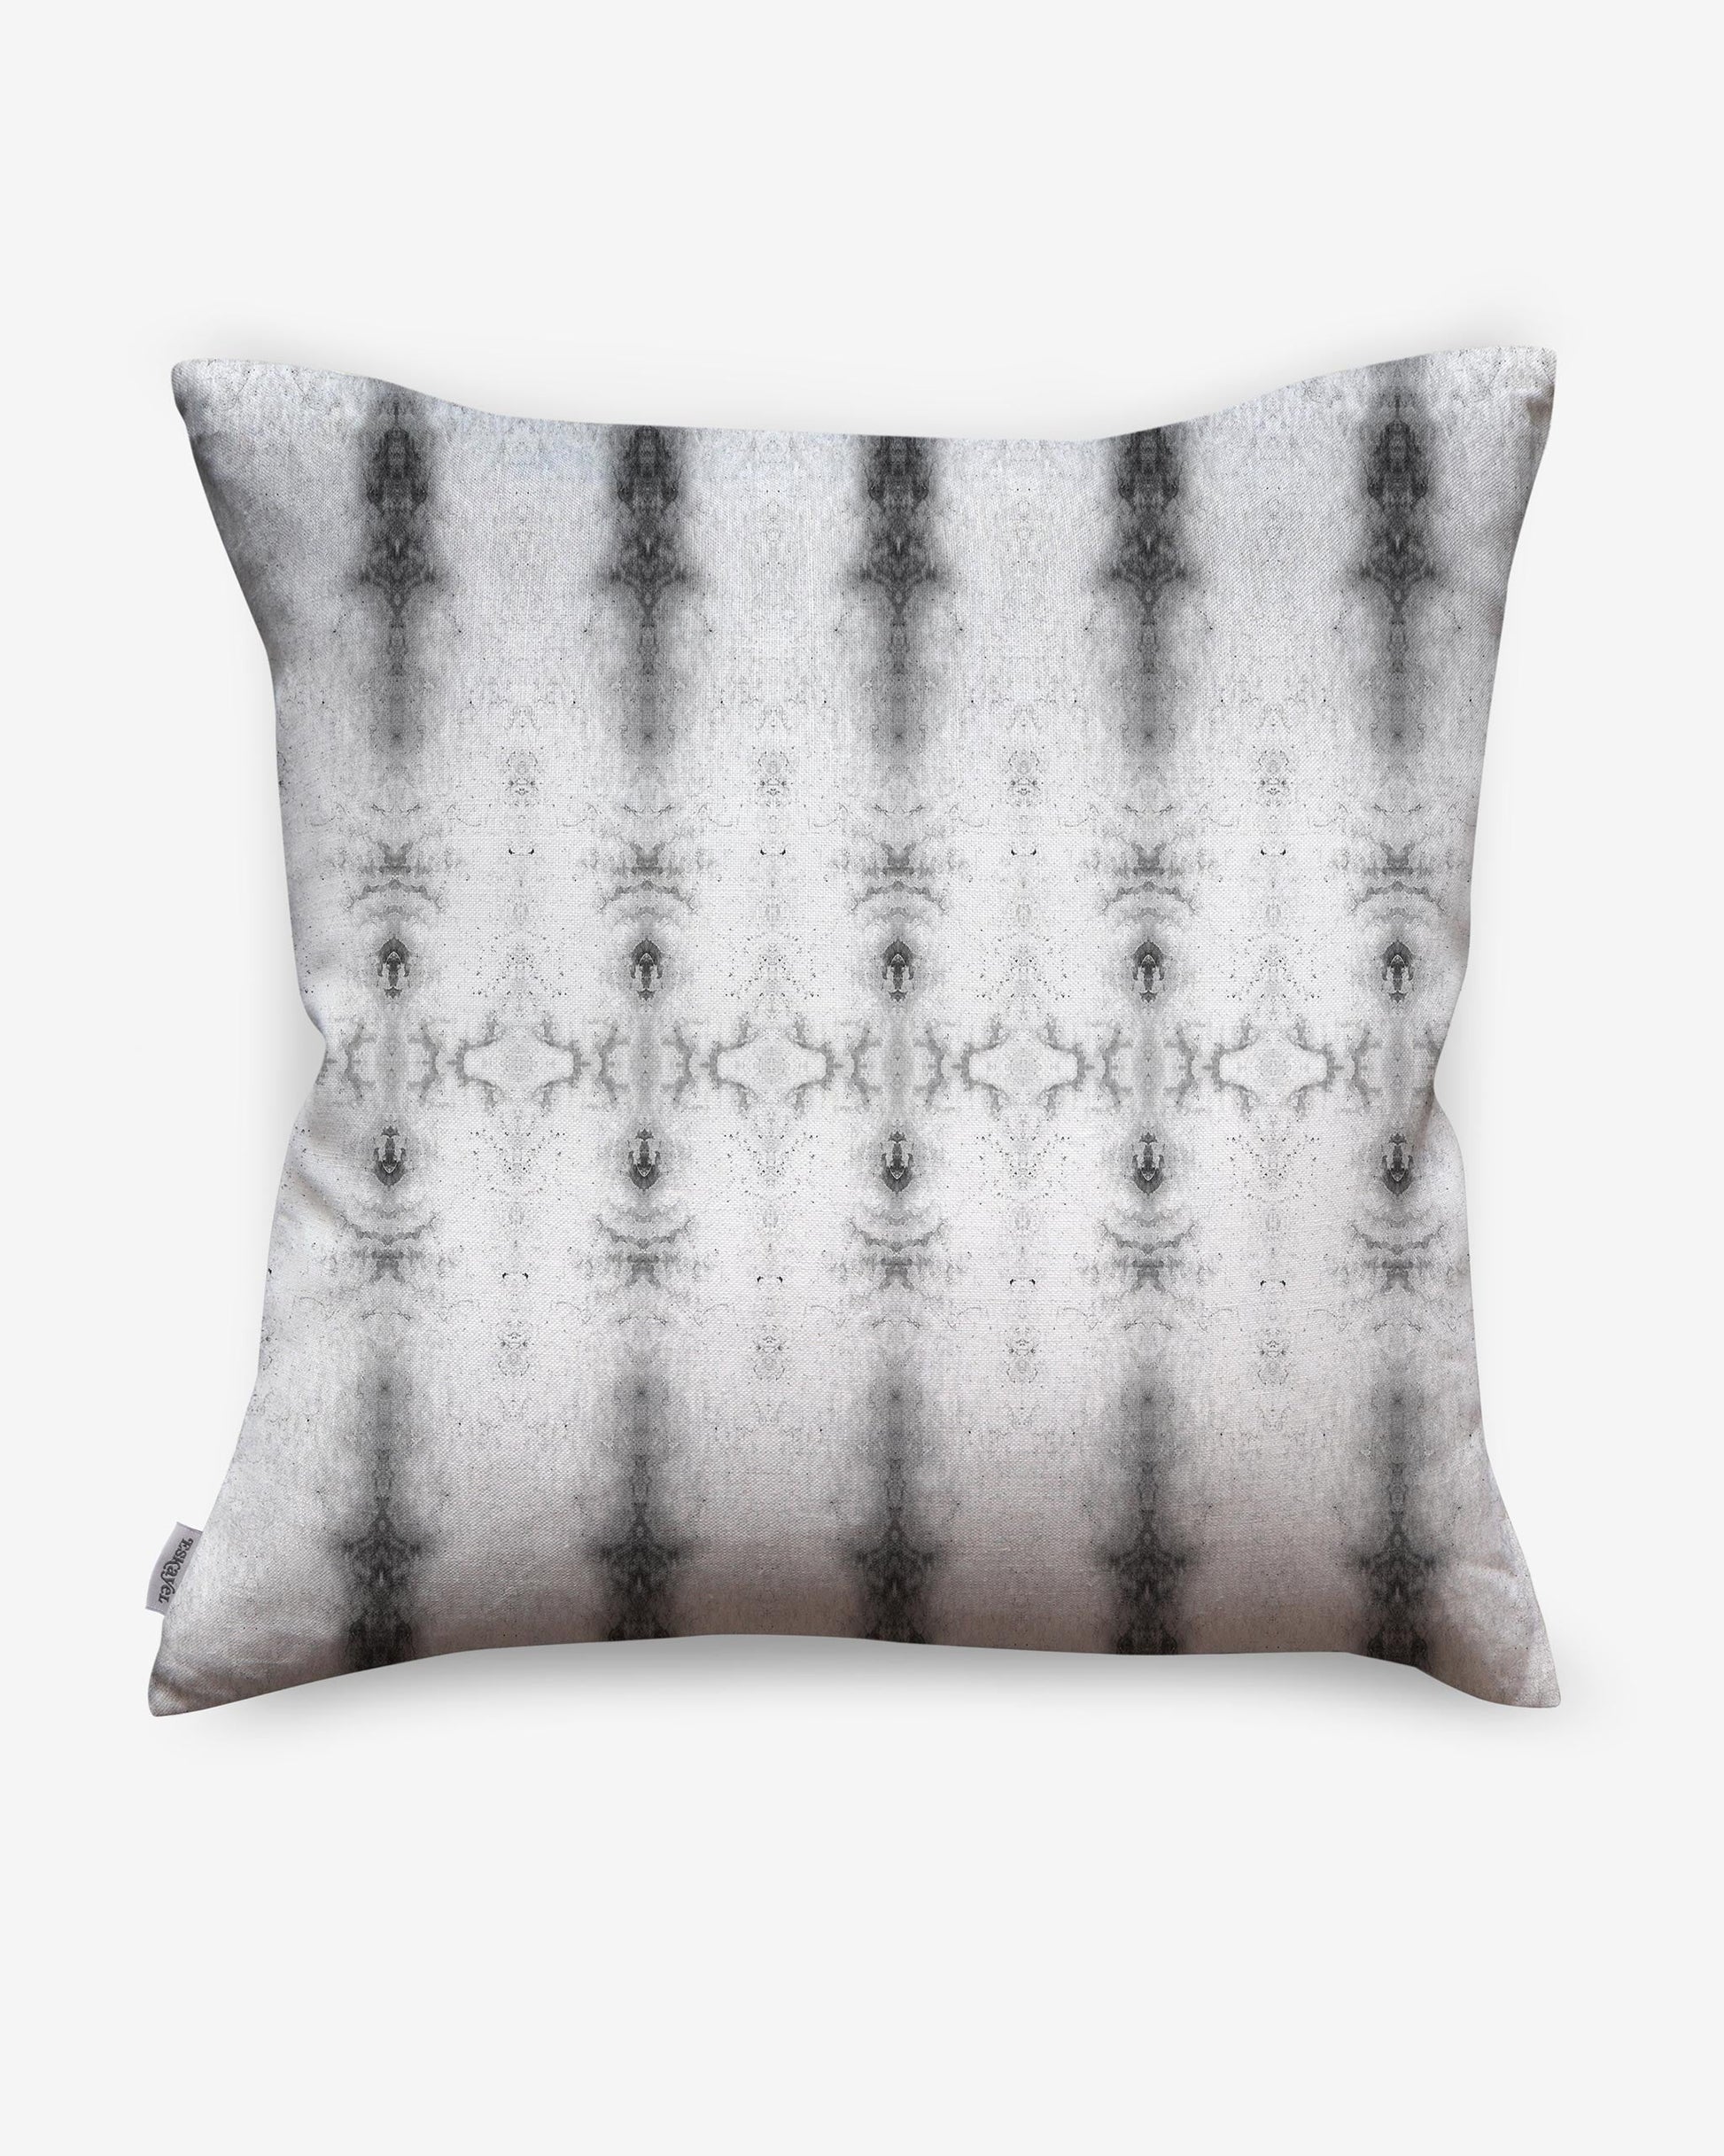 A black and white Akimbo 7 Pillow Greyscale with a geometric pattern